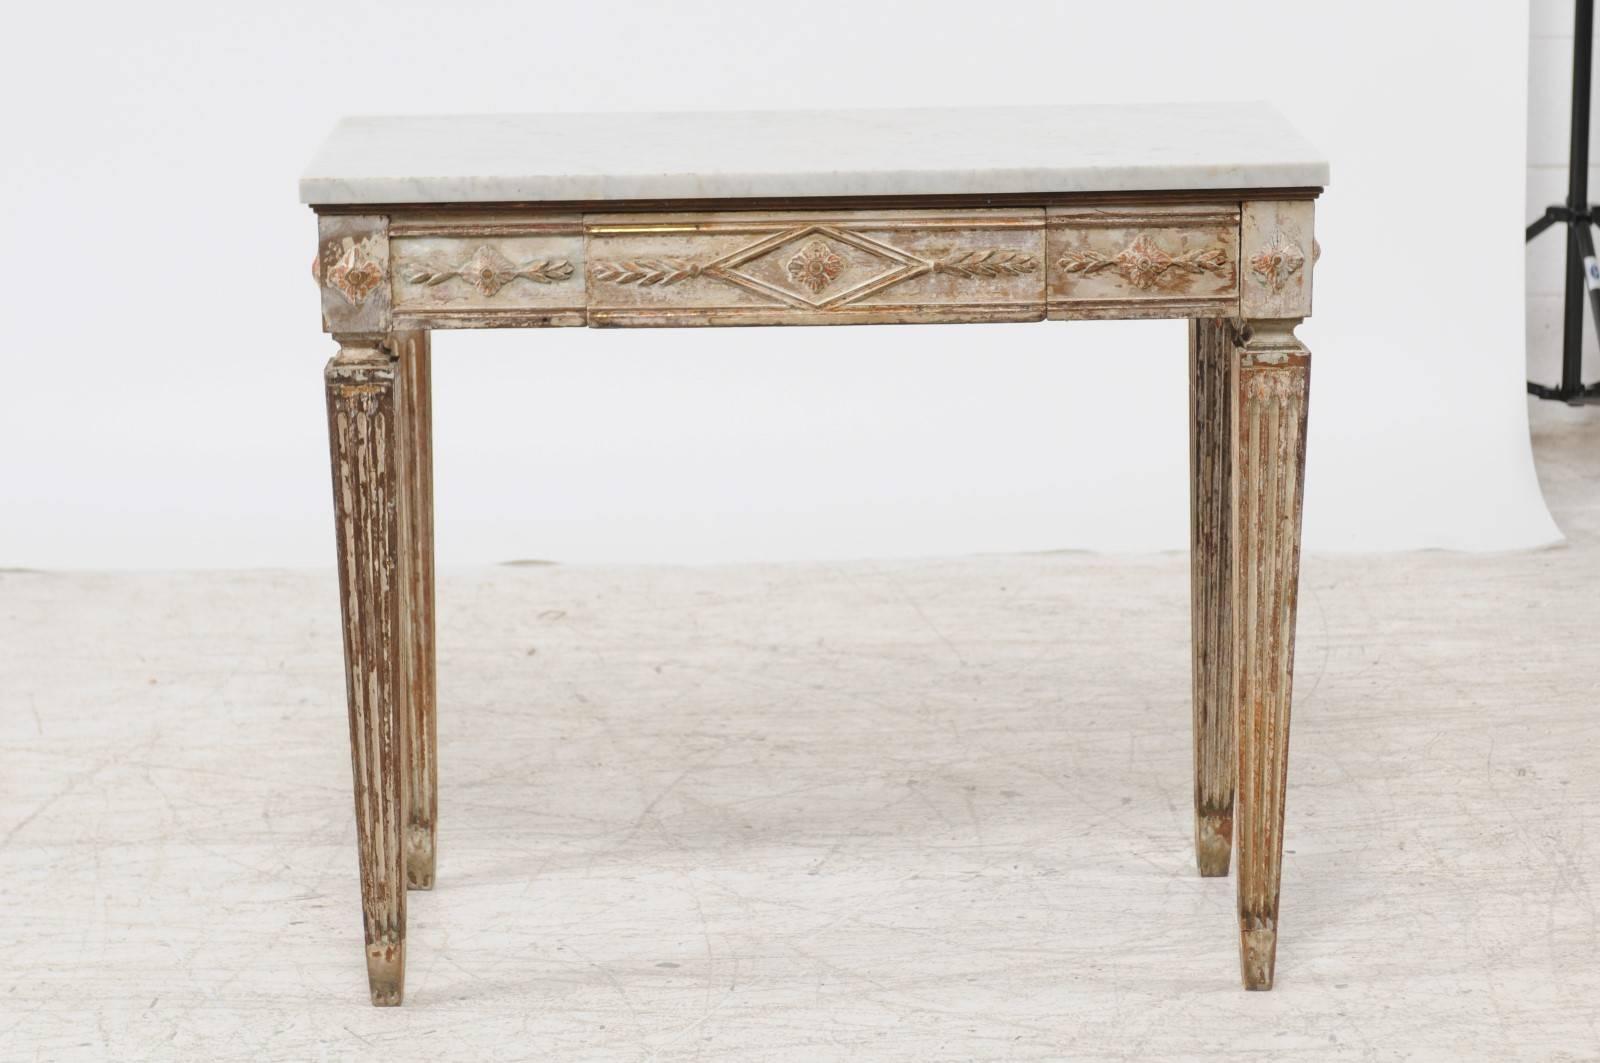 A Swedish Neoclassical style white marble top with single drawer, distressed paint and tapered legs from the second half of the 19th century. This Swedish console table features a white rectangular top sitting above an exquisitely carved base. The